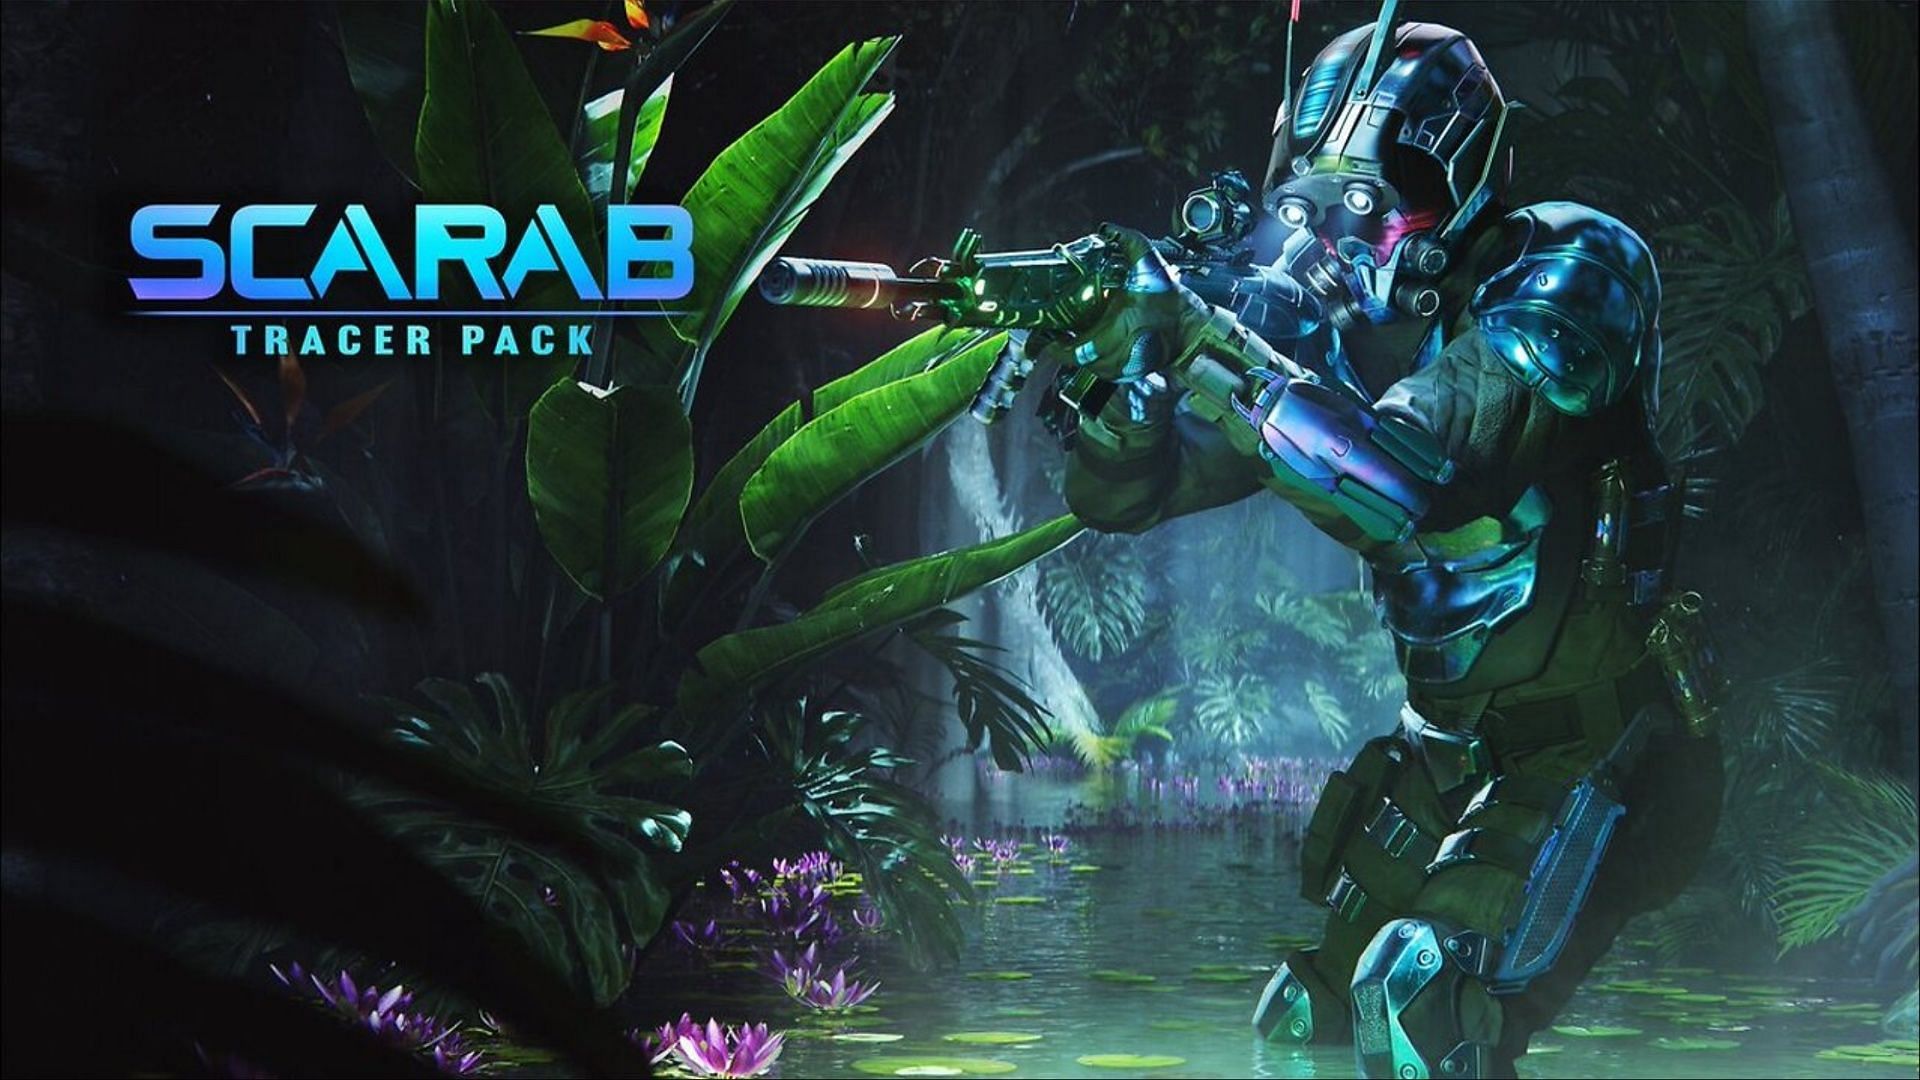 Scarab Tracer Pack operator bundle in MW3 and Warzone (Image via Activision)